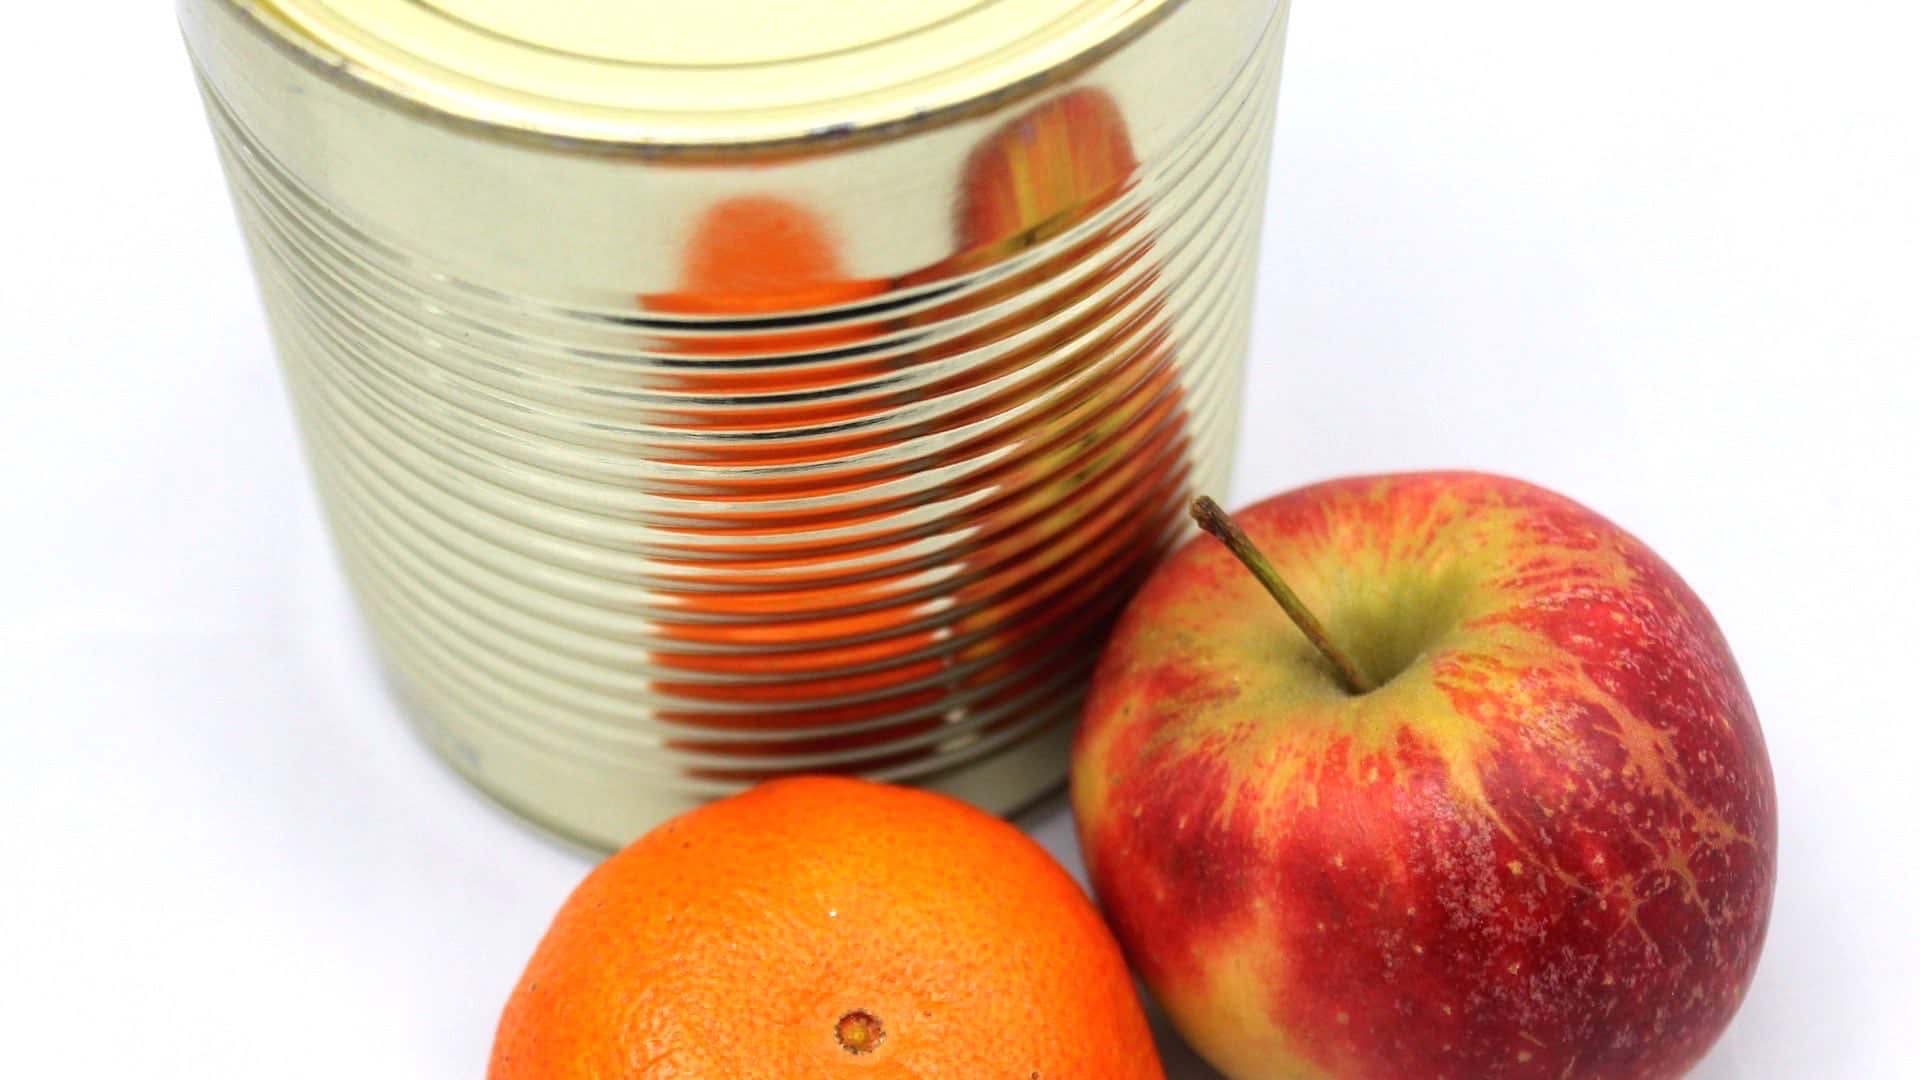 Is Canned Fruit as Healthy?